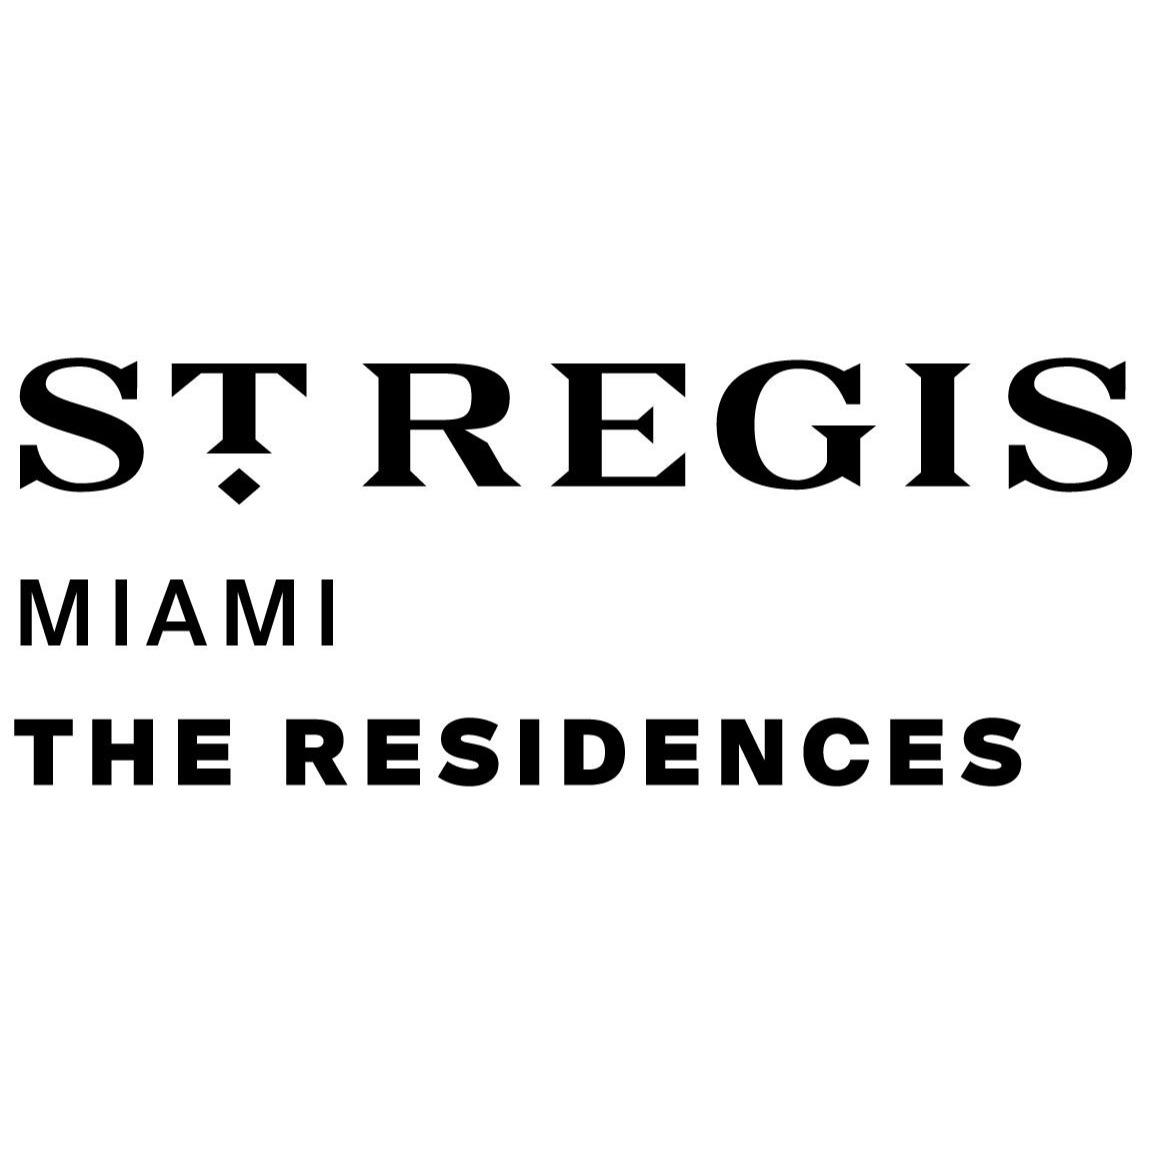 The St. Regis Residences, Miami - Official Sales Gallery